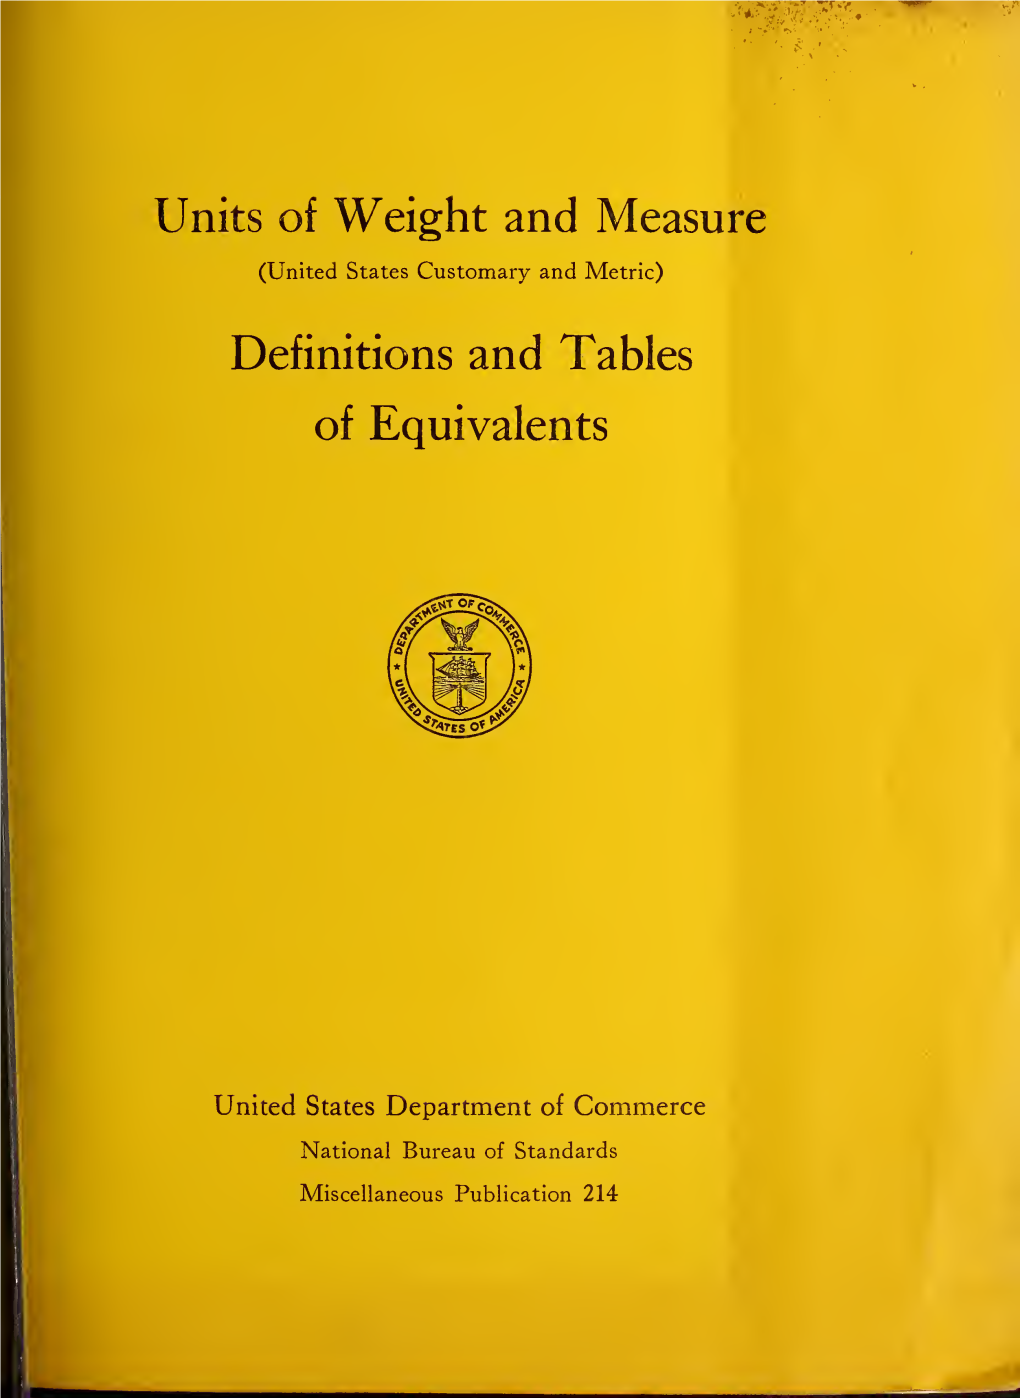 Units of Weight and Measure